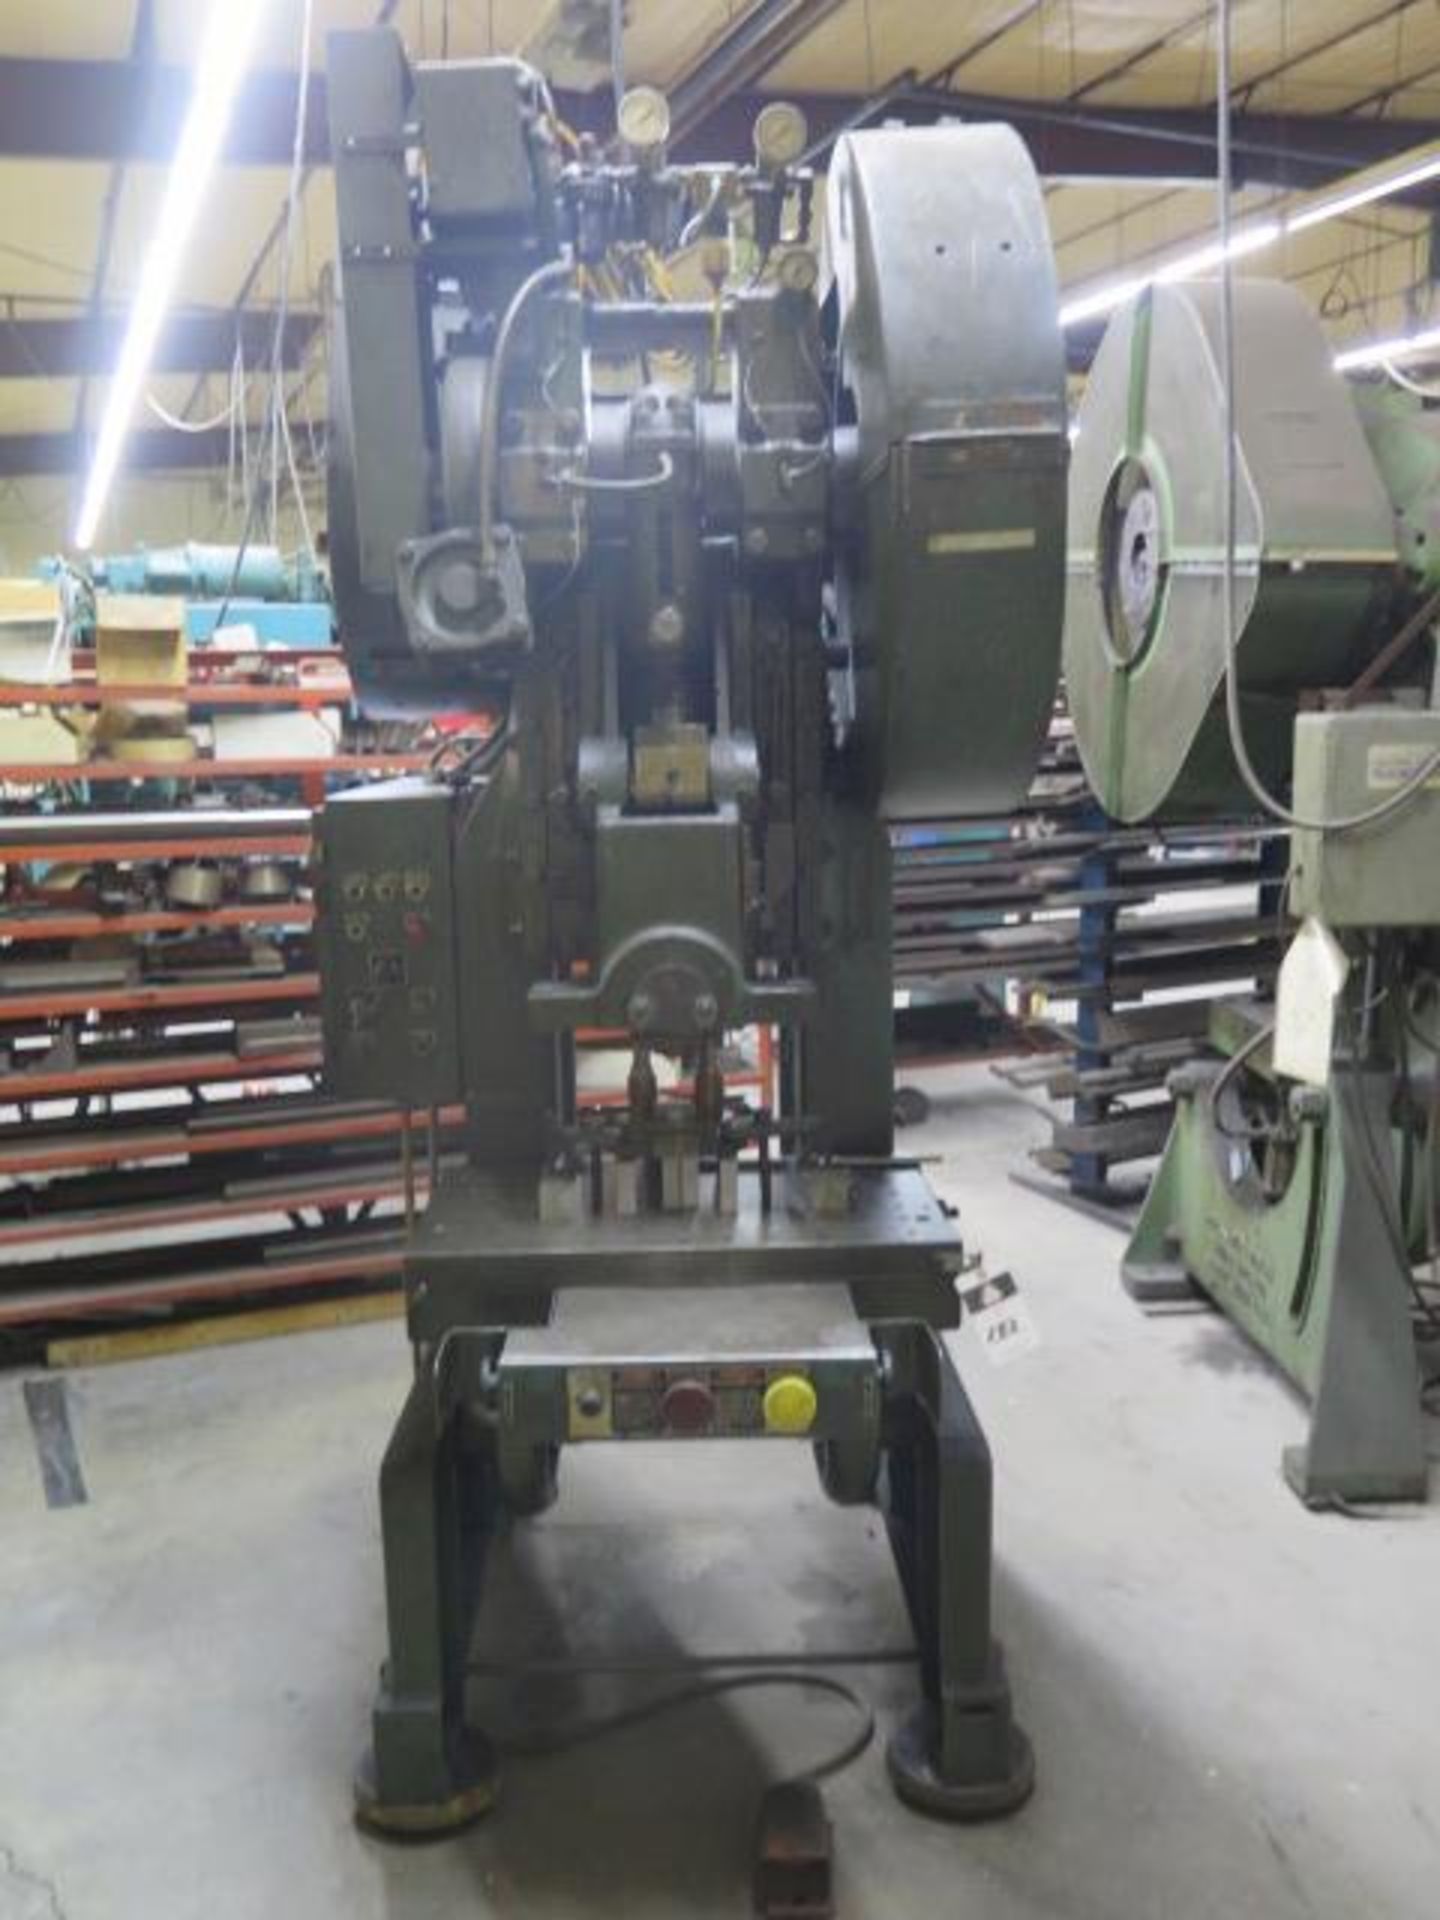 Rousselle No. 6A 60 Ton OBI Stamping Press SOLD AS PARTS ONLY, SOLD AS IS - NO WARRANTY